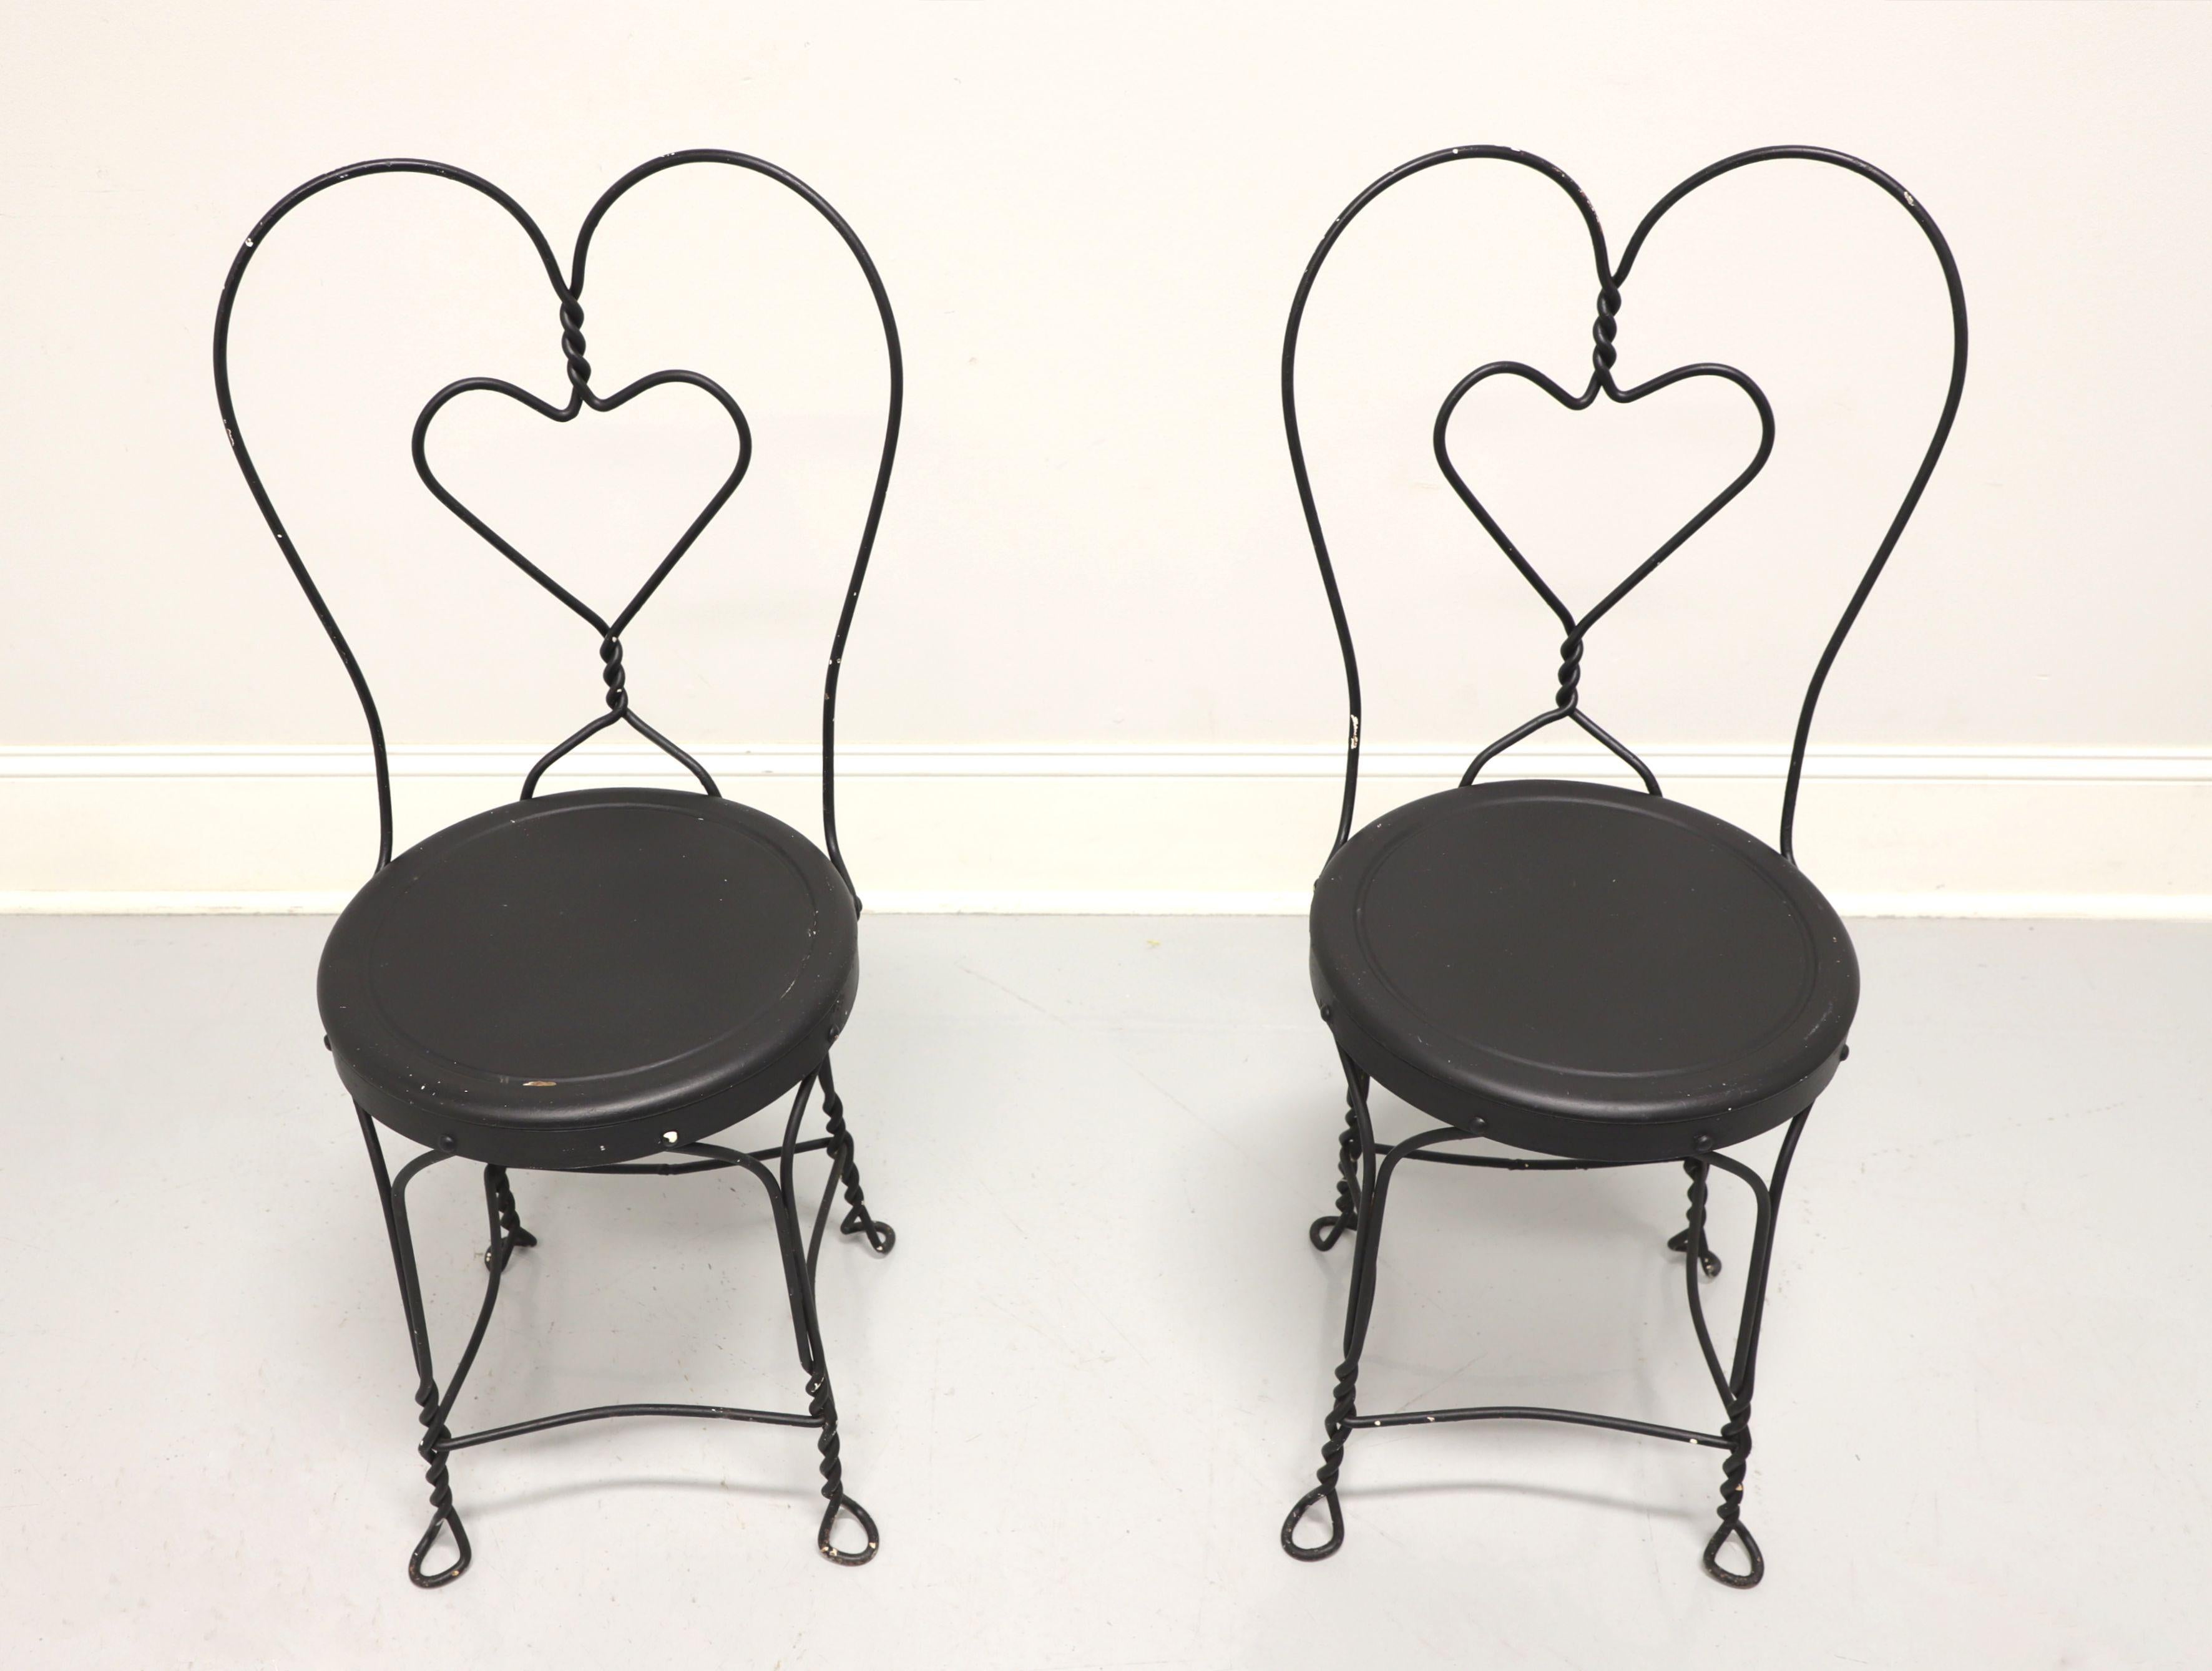 A pair of Victorian style wrought iron ice cream parlor bistro chairs, unbranded. Wrought iron metal frames, distressed black painted finish, metal seats, twisted backs and legs. Ready for a fresh coat of paint or can be used as-found. Made in the